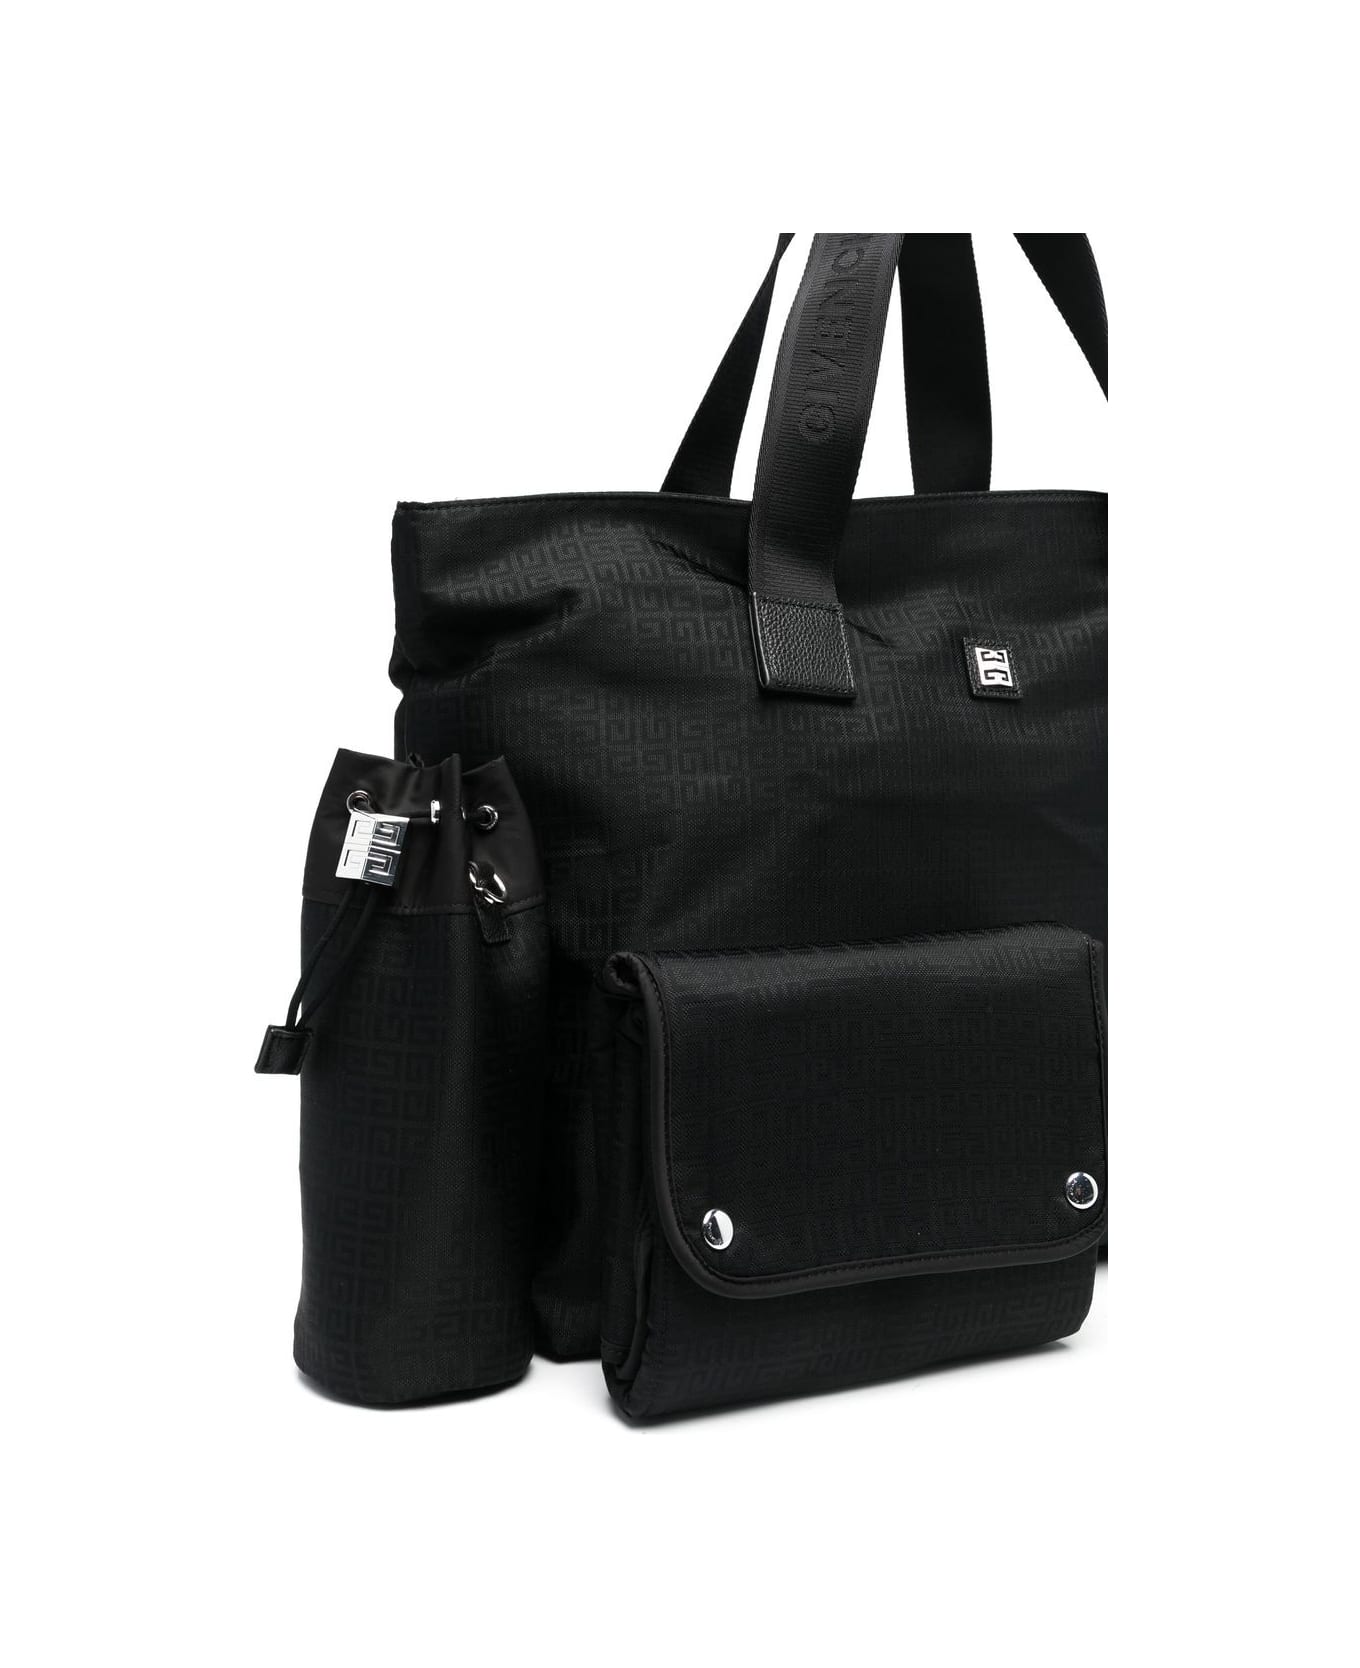 Givenchy Black Leather Changing Bag - Nero